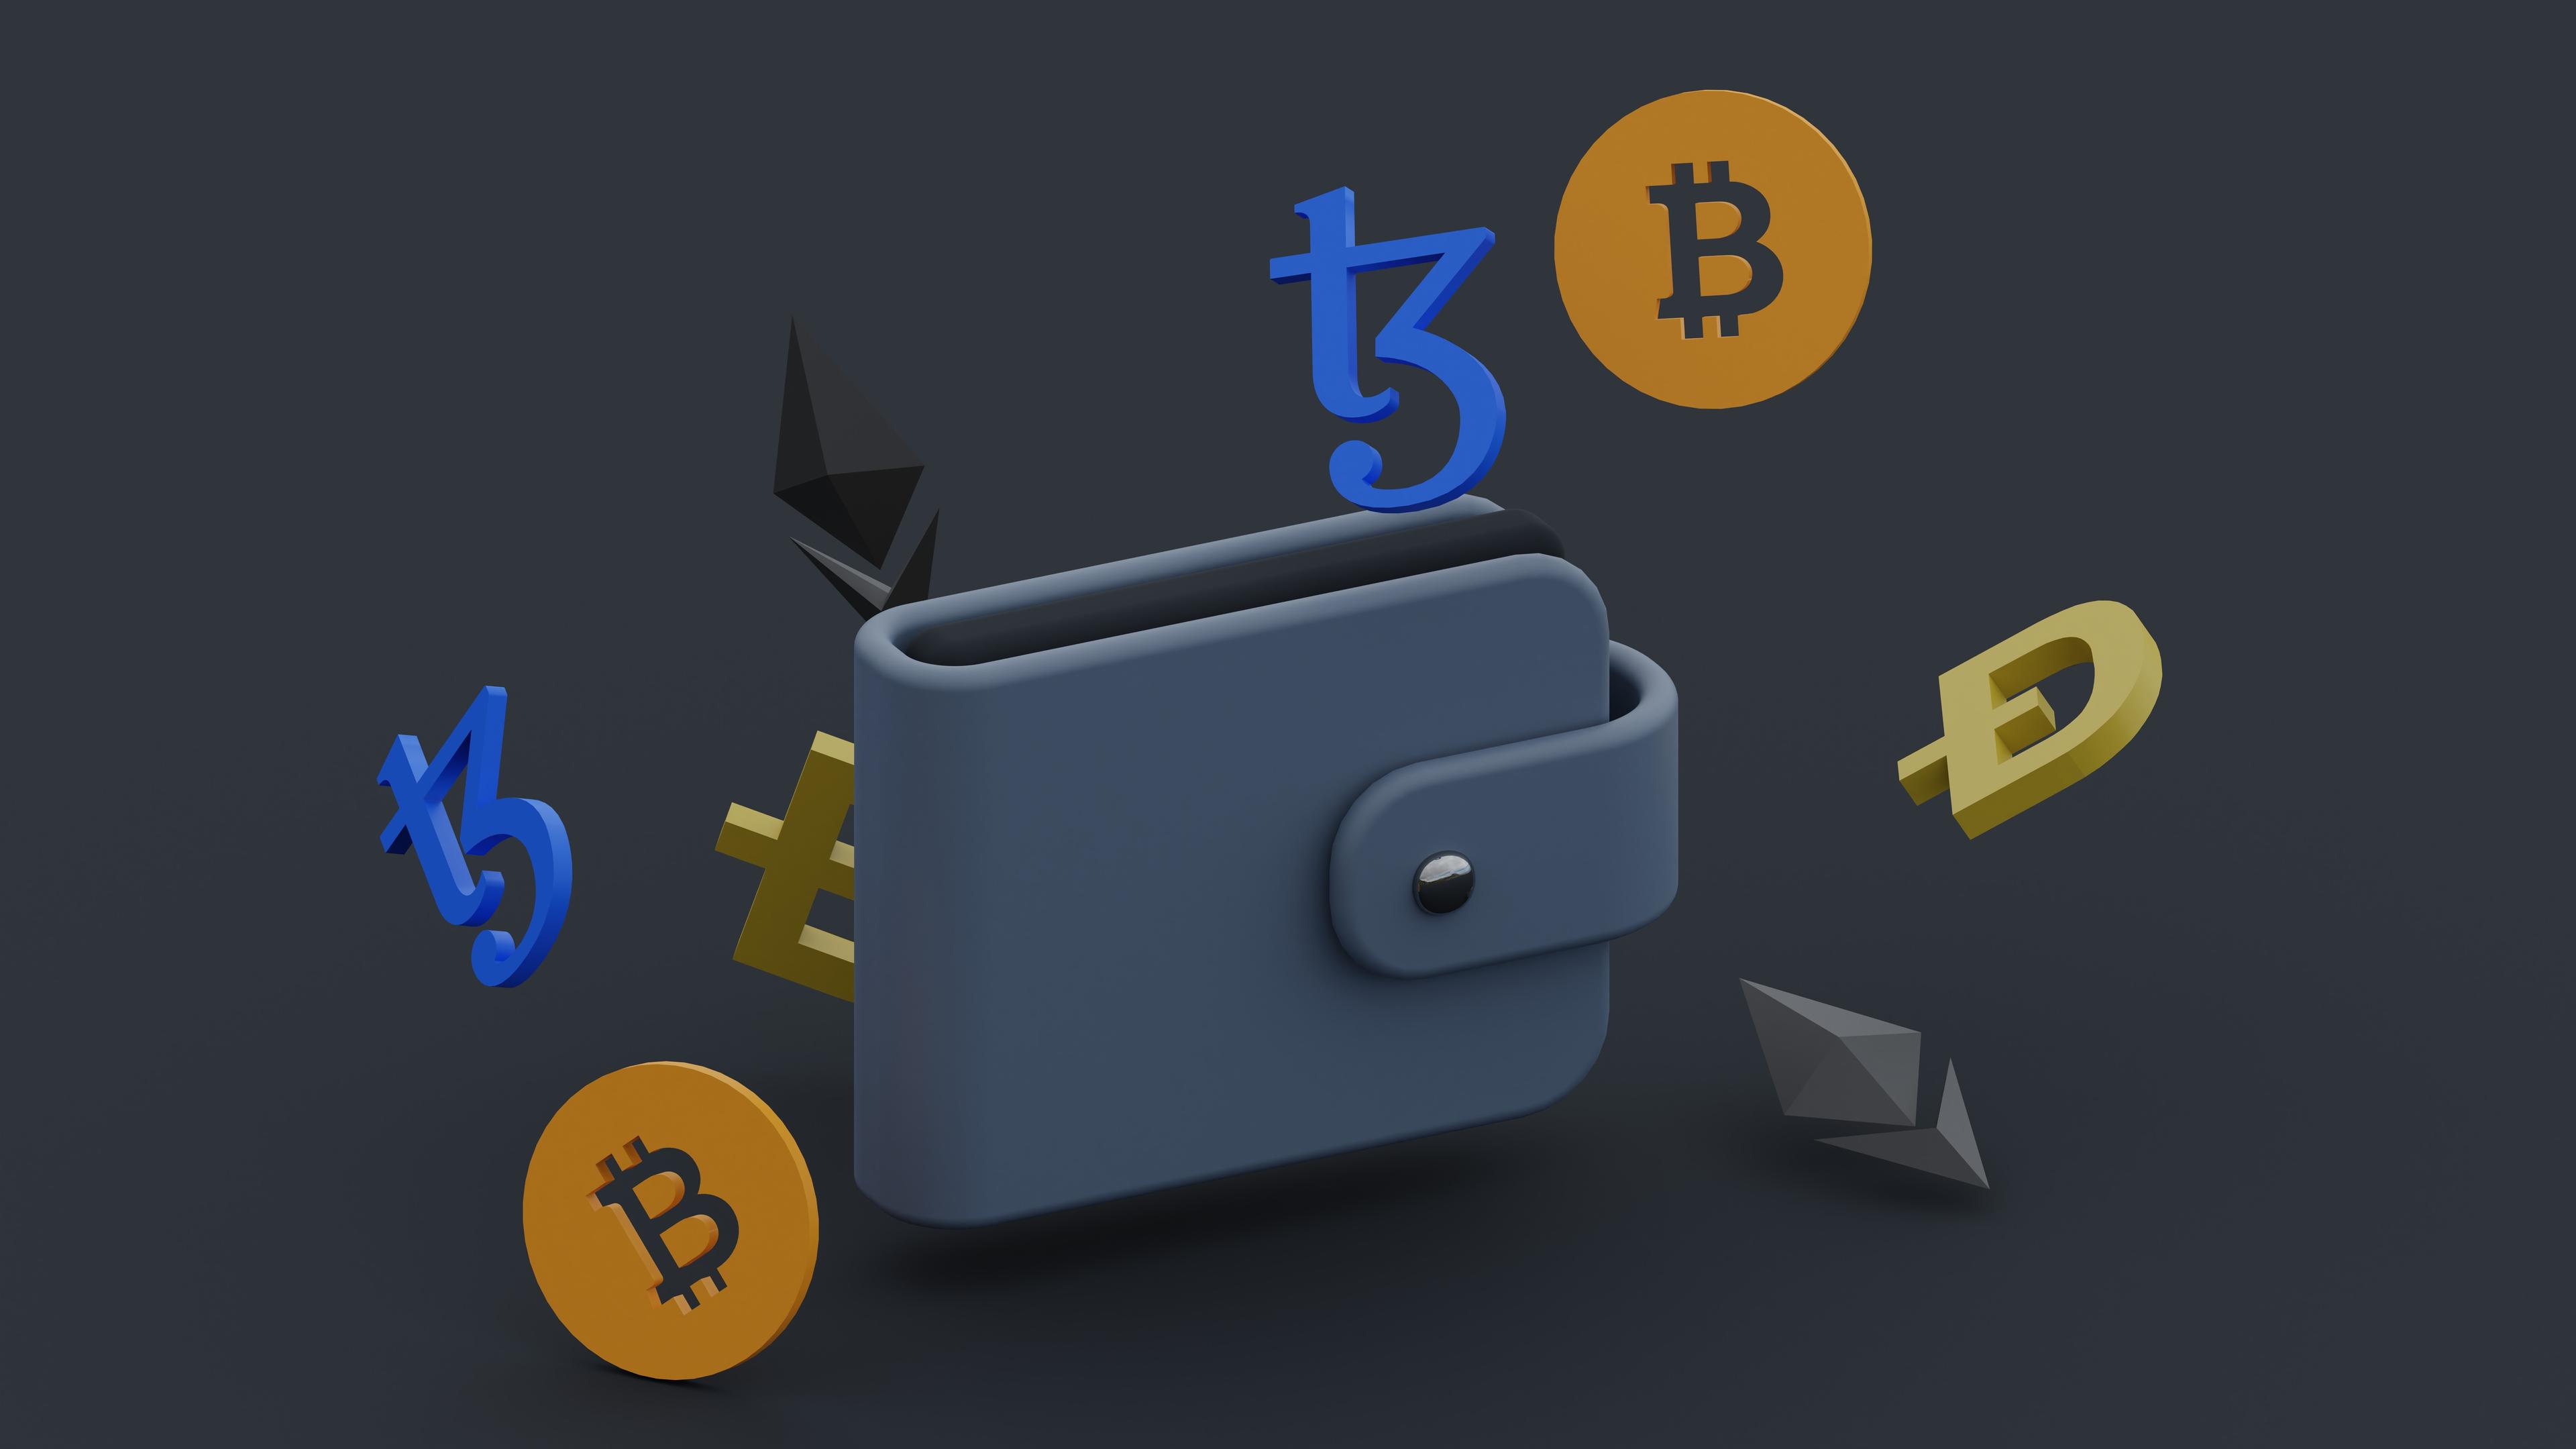 Wallet icon with various cryptocurrencies floating out of it.